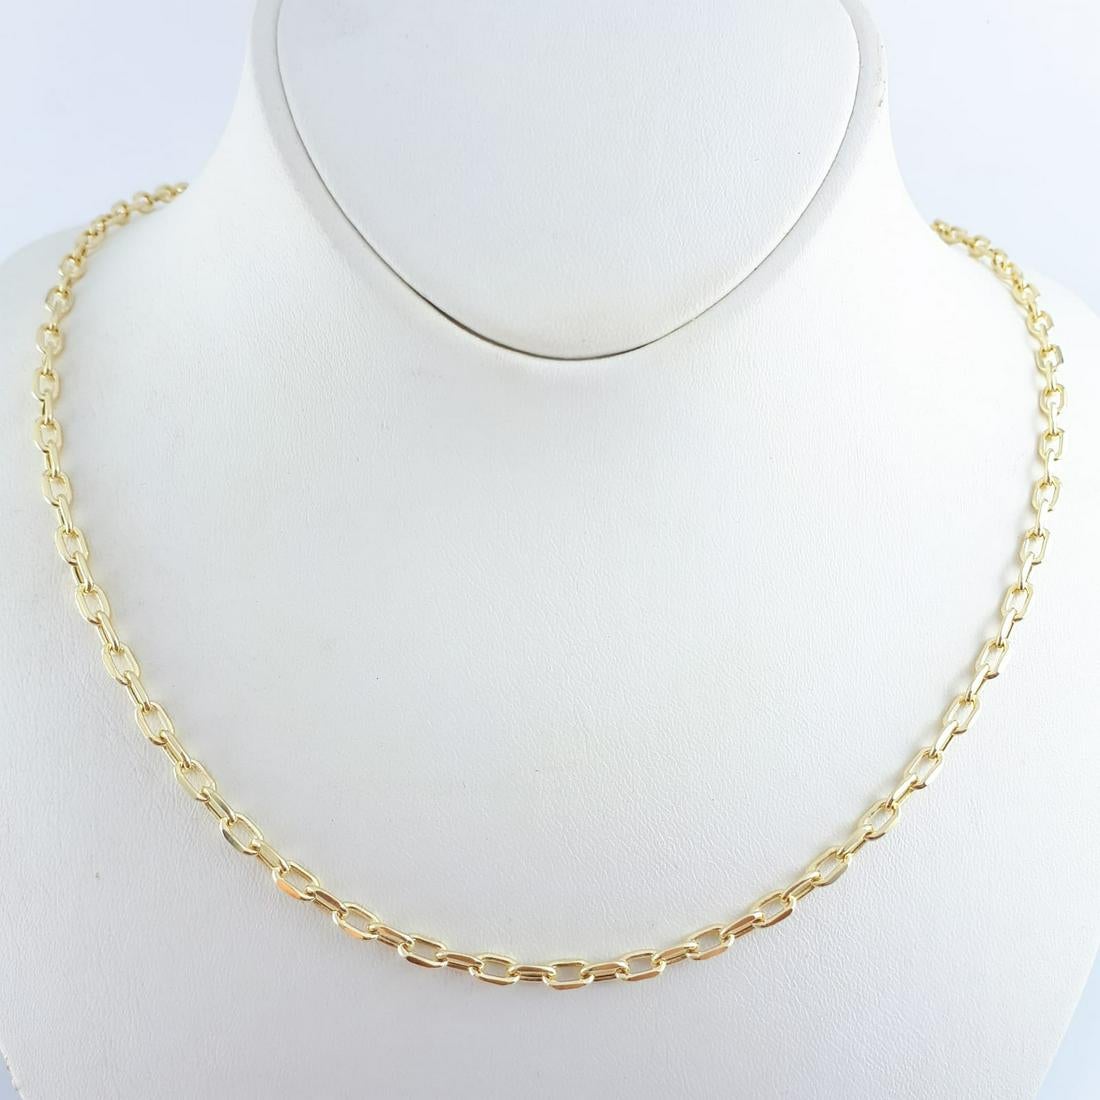 14K Yellow Gold - Necklace - Image 2 of 5